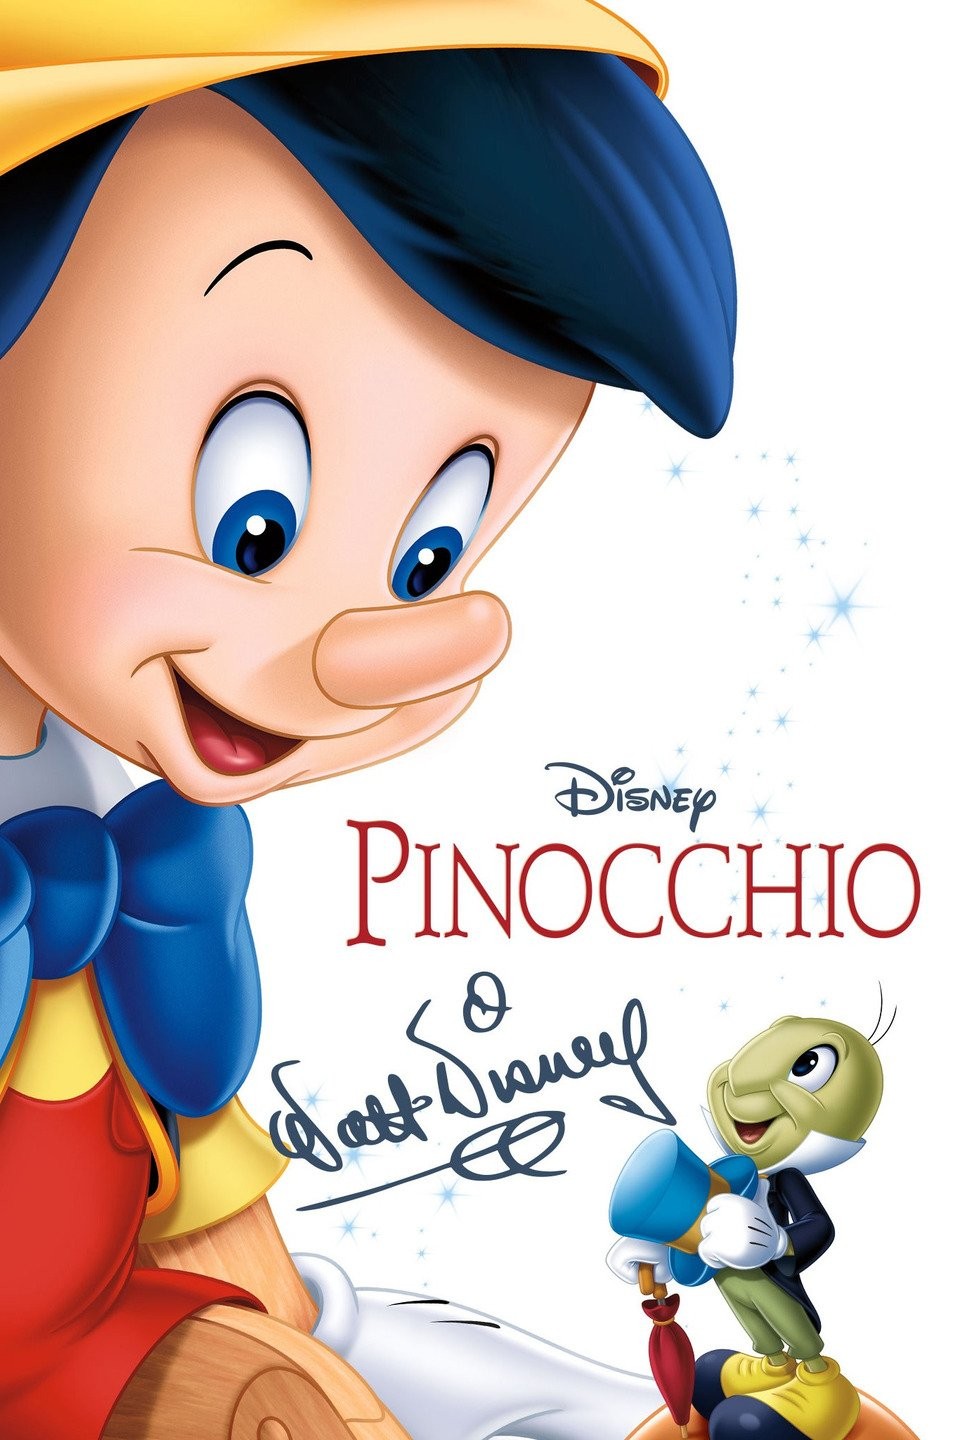 Why Disney's Pinocchio was so important to its new animated movie